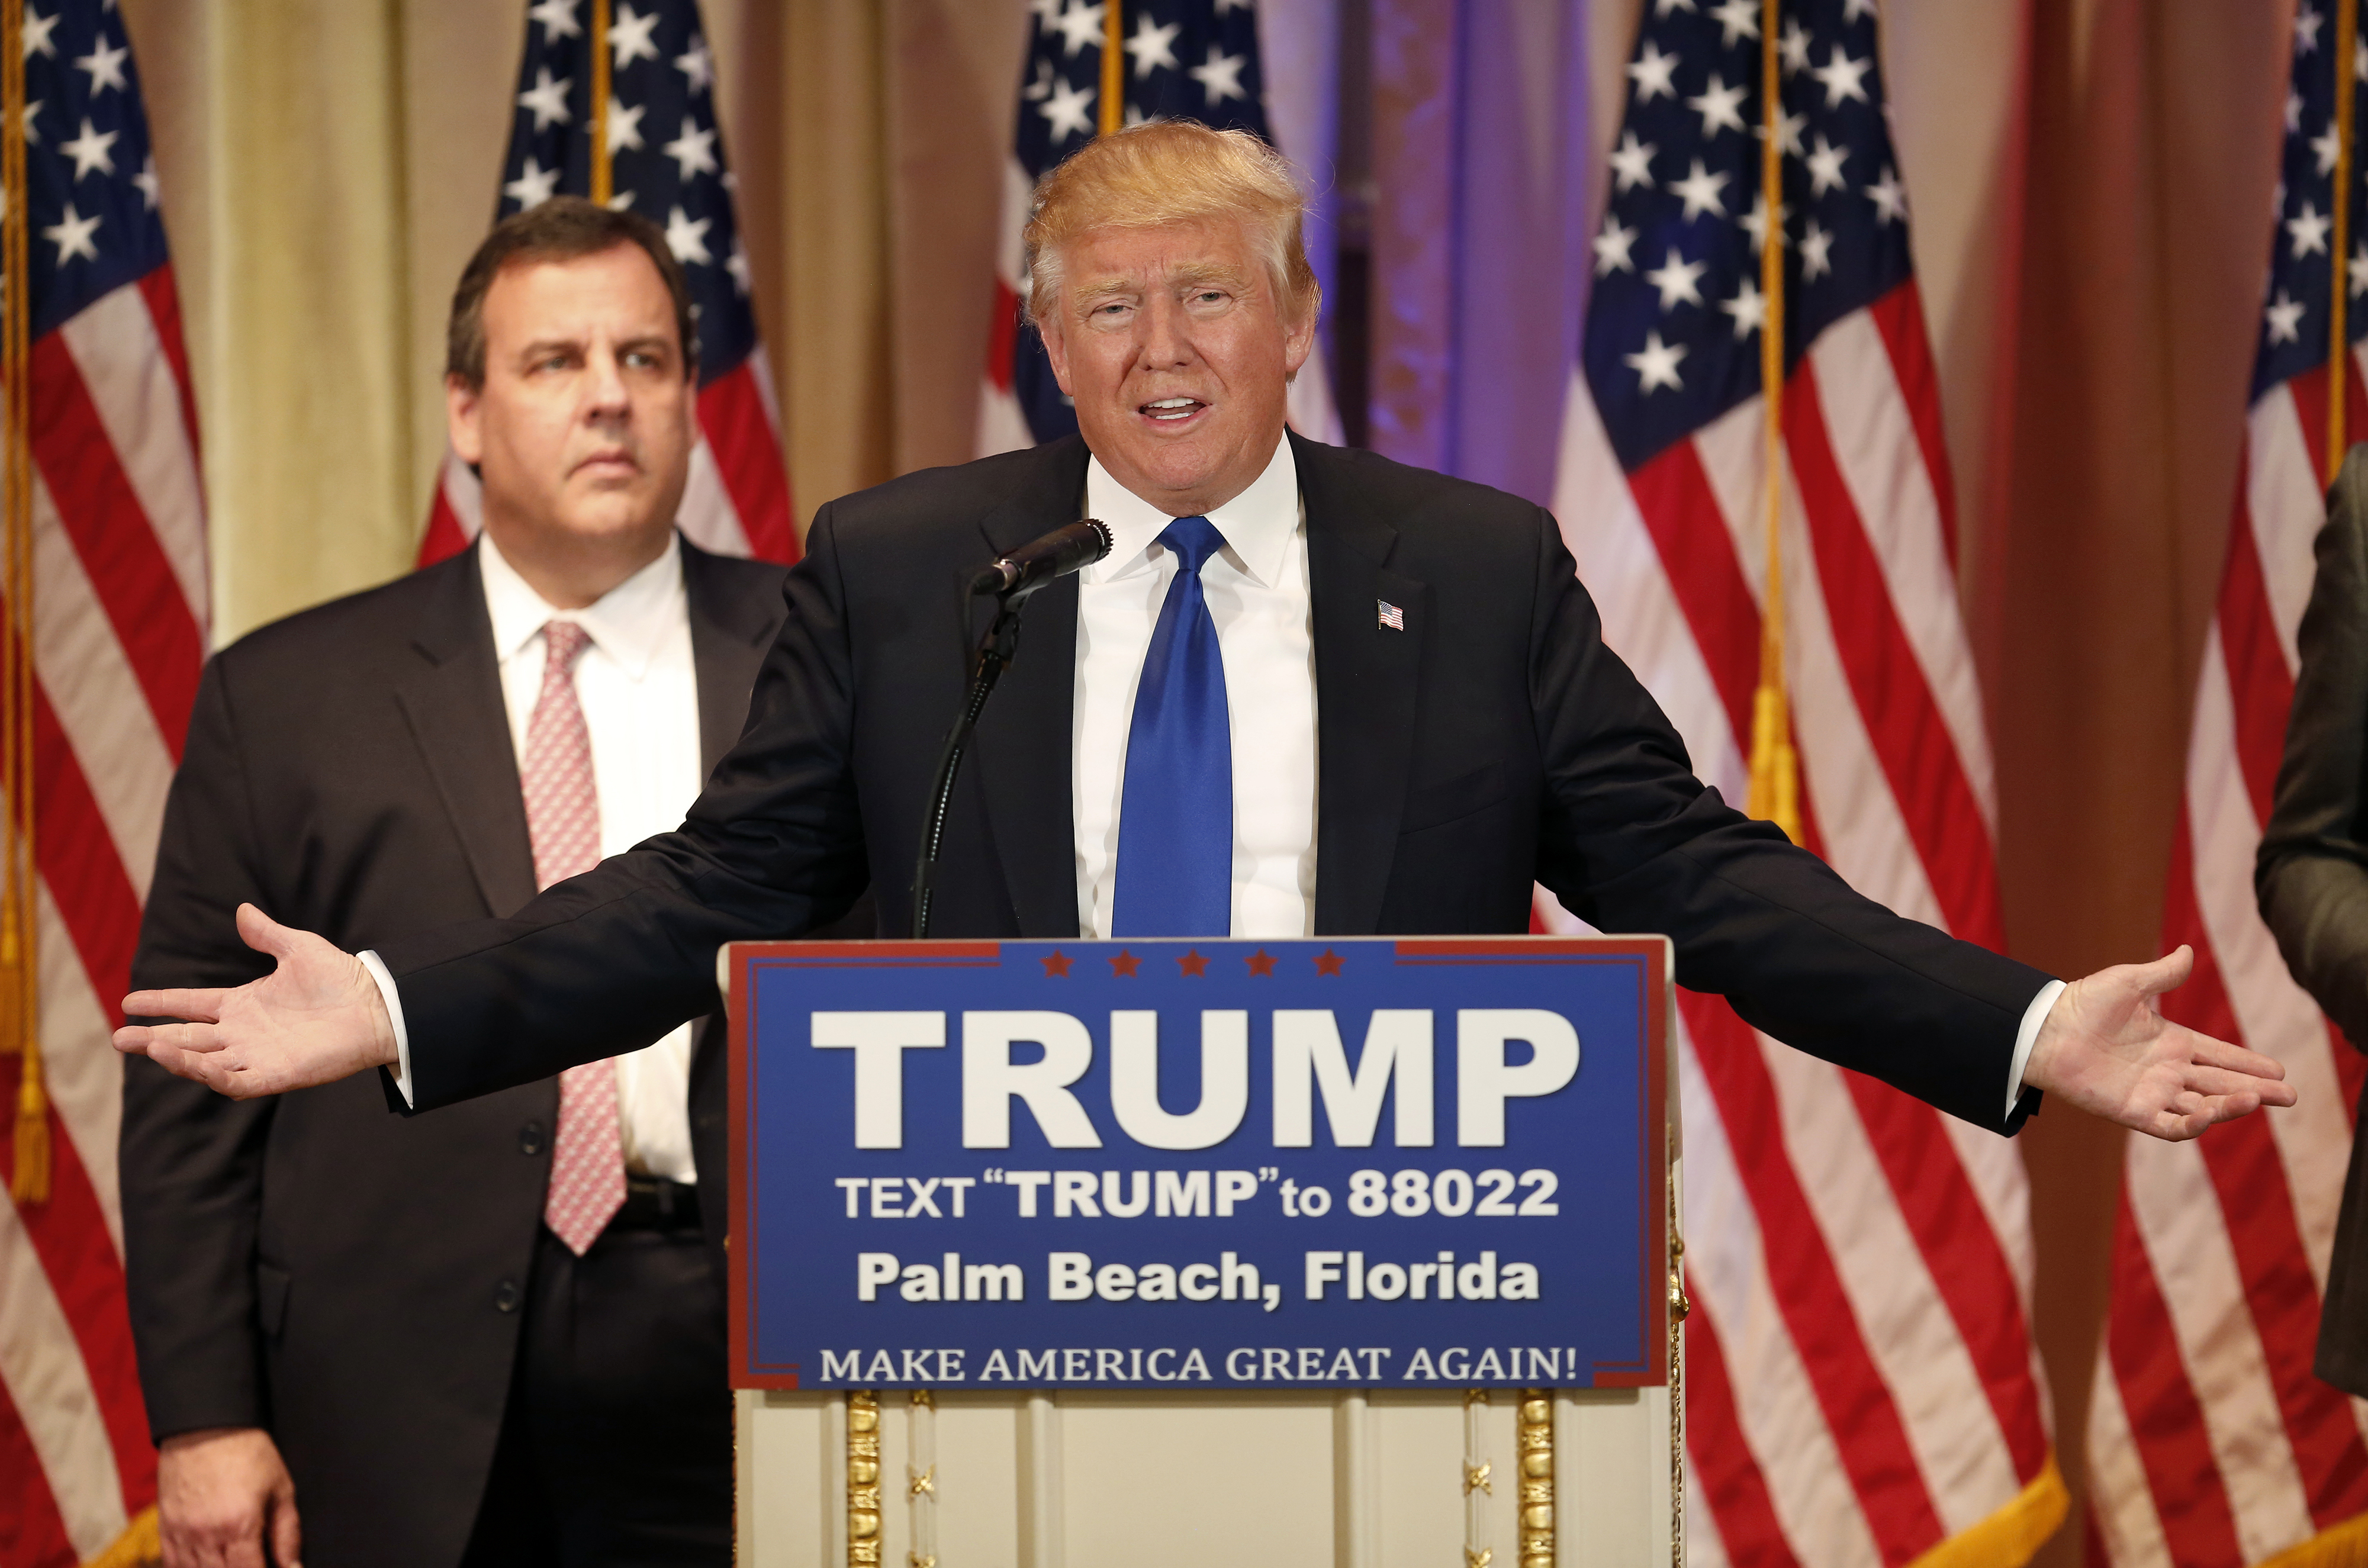 Donald Trump speaks on stage with Chris Christie in Palm Beach, Florida, on March 1, 2016. (Luke Sharrett—Bloomberg/Getty Images)